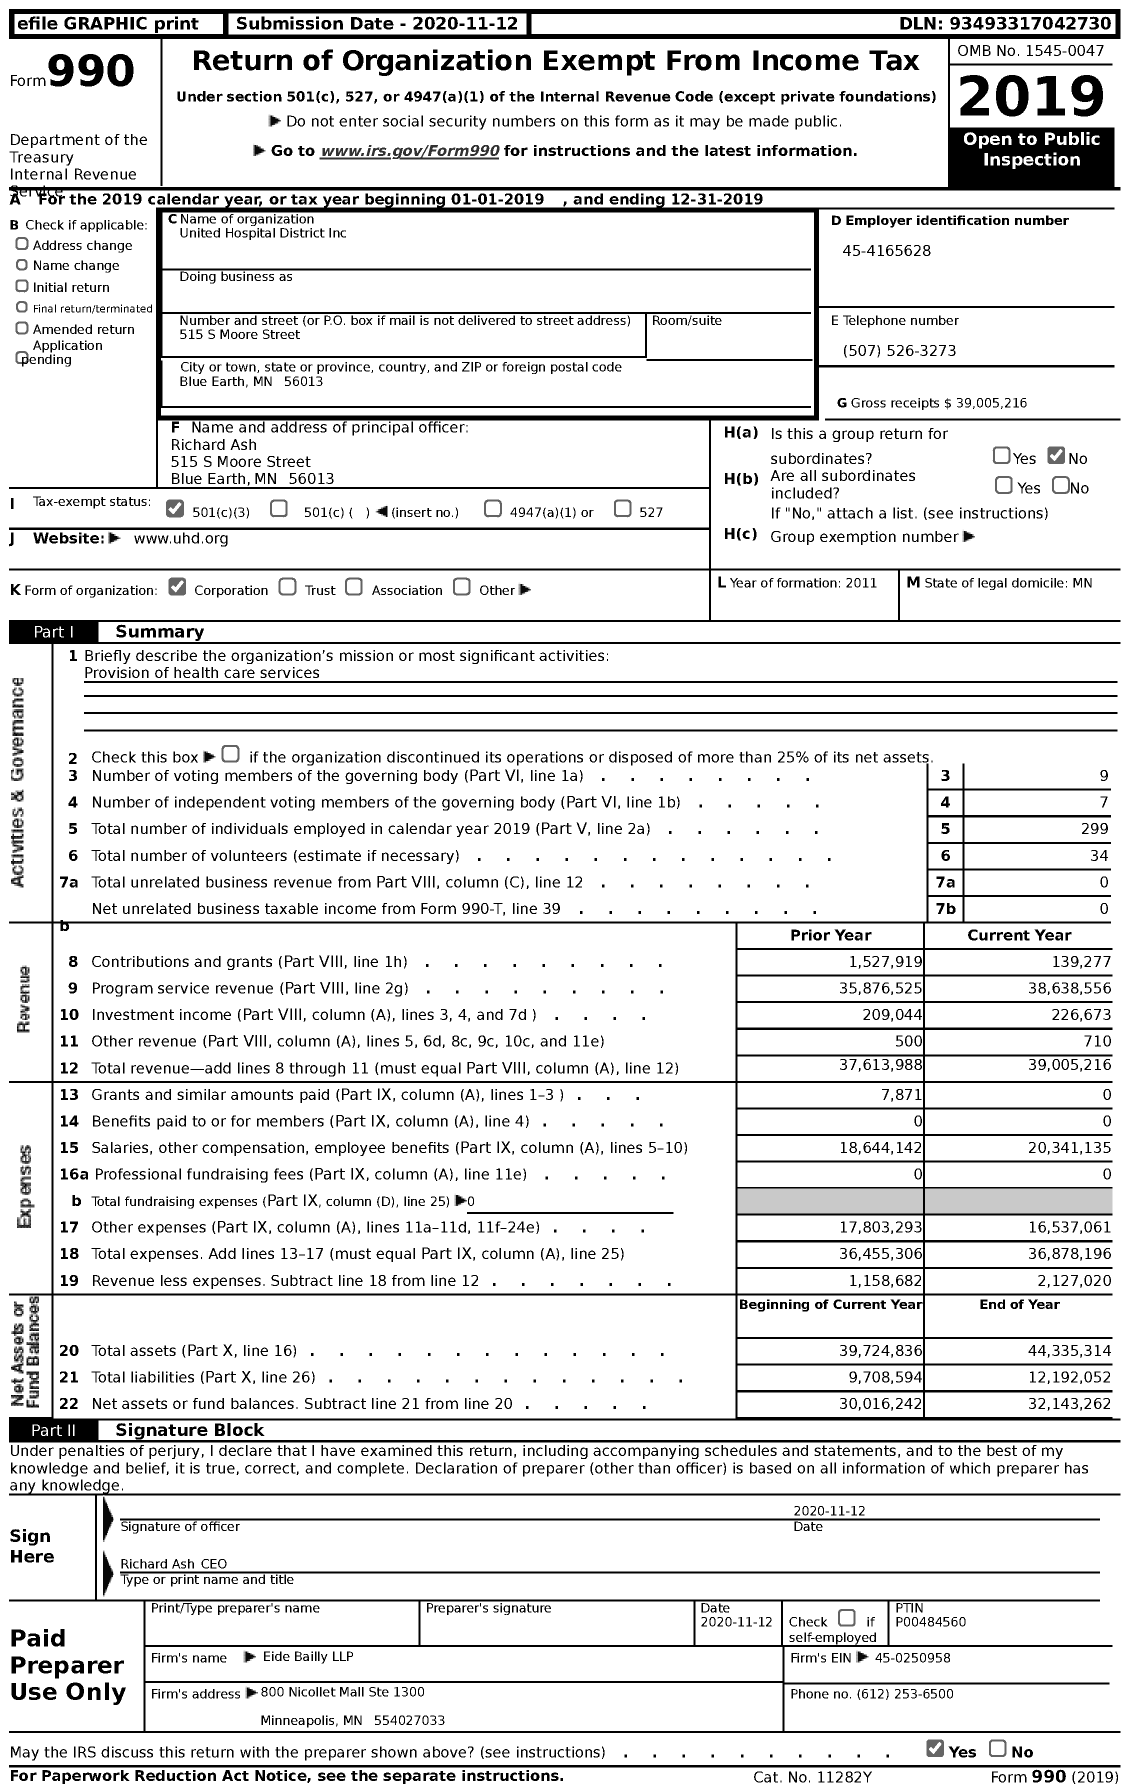 Image of first page of 2019 Form 990 for United Hospital District (UHD)